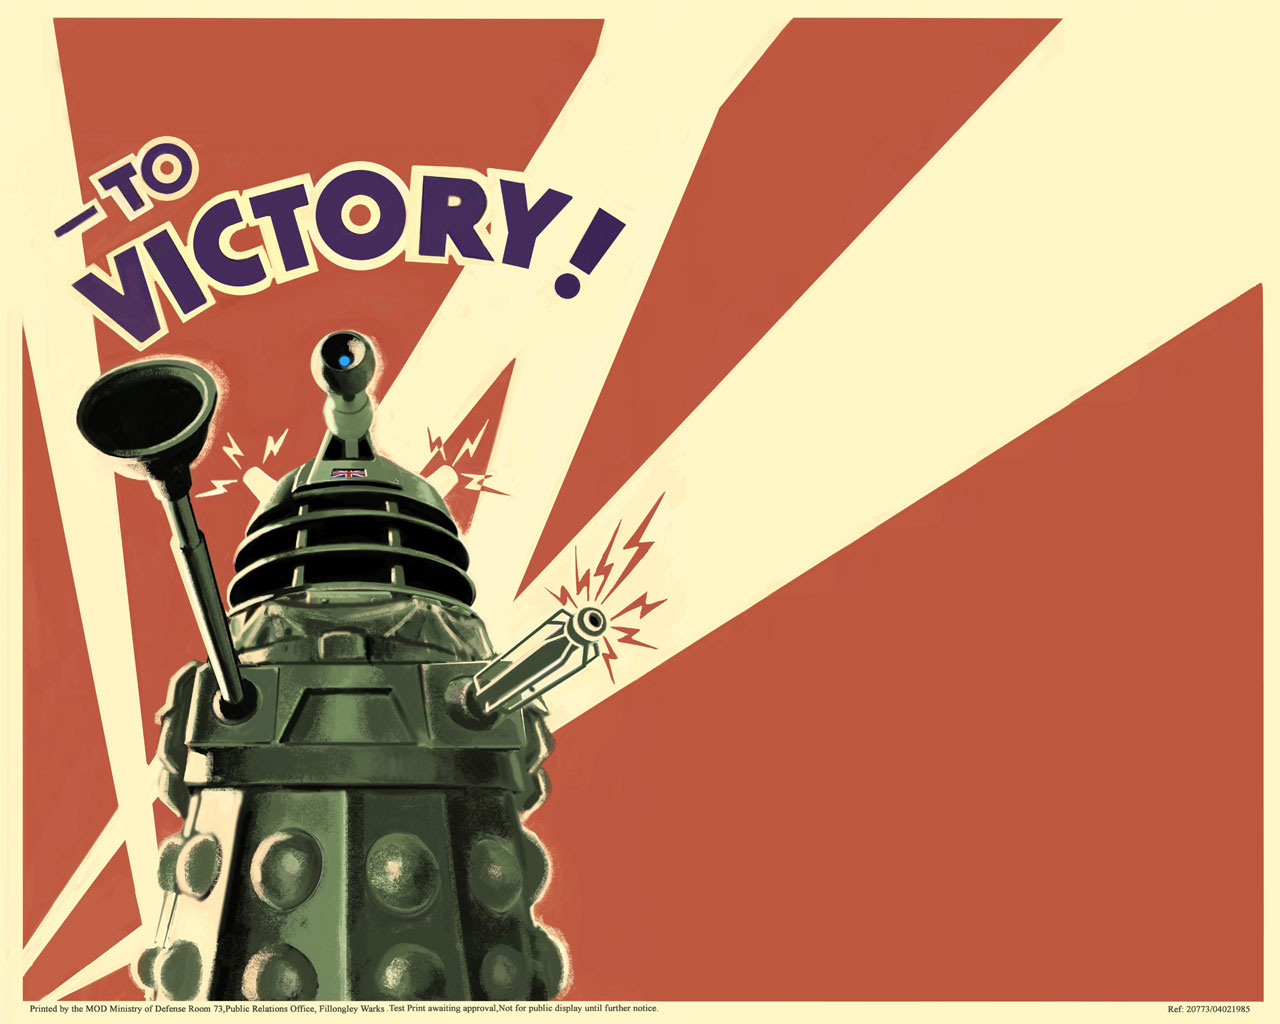 Download mobile wallpaper Doctor Who, Tv Show, Dalek for free.